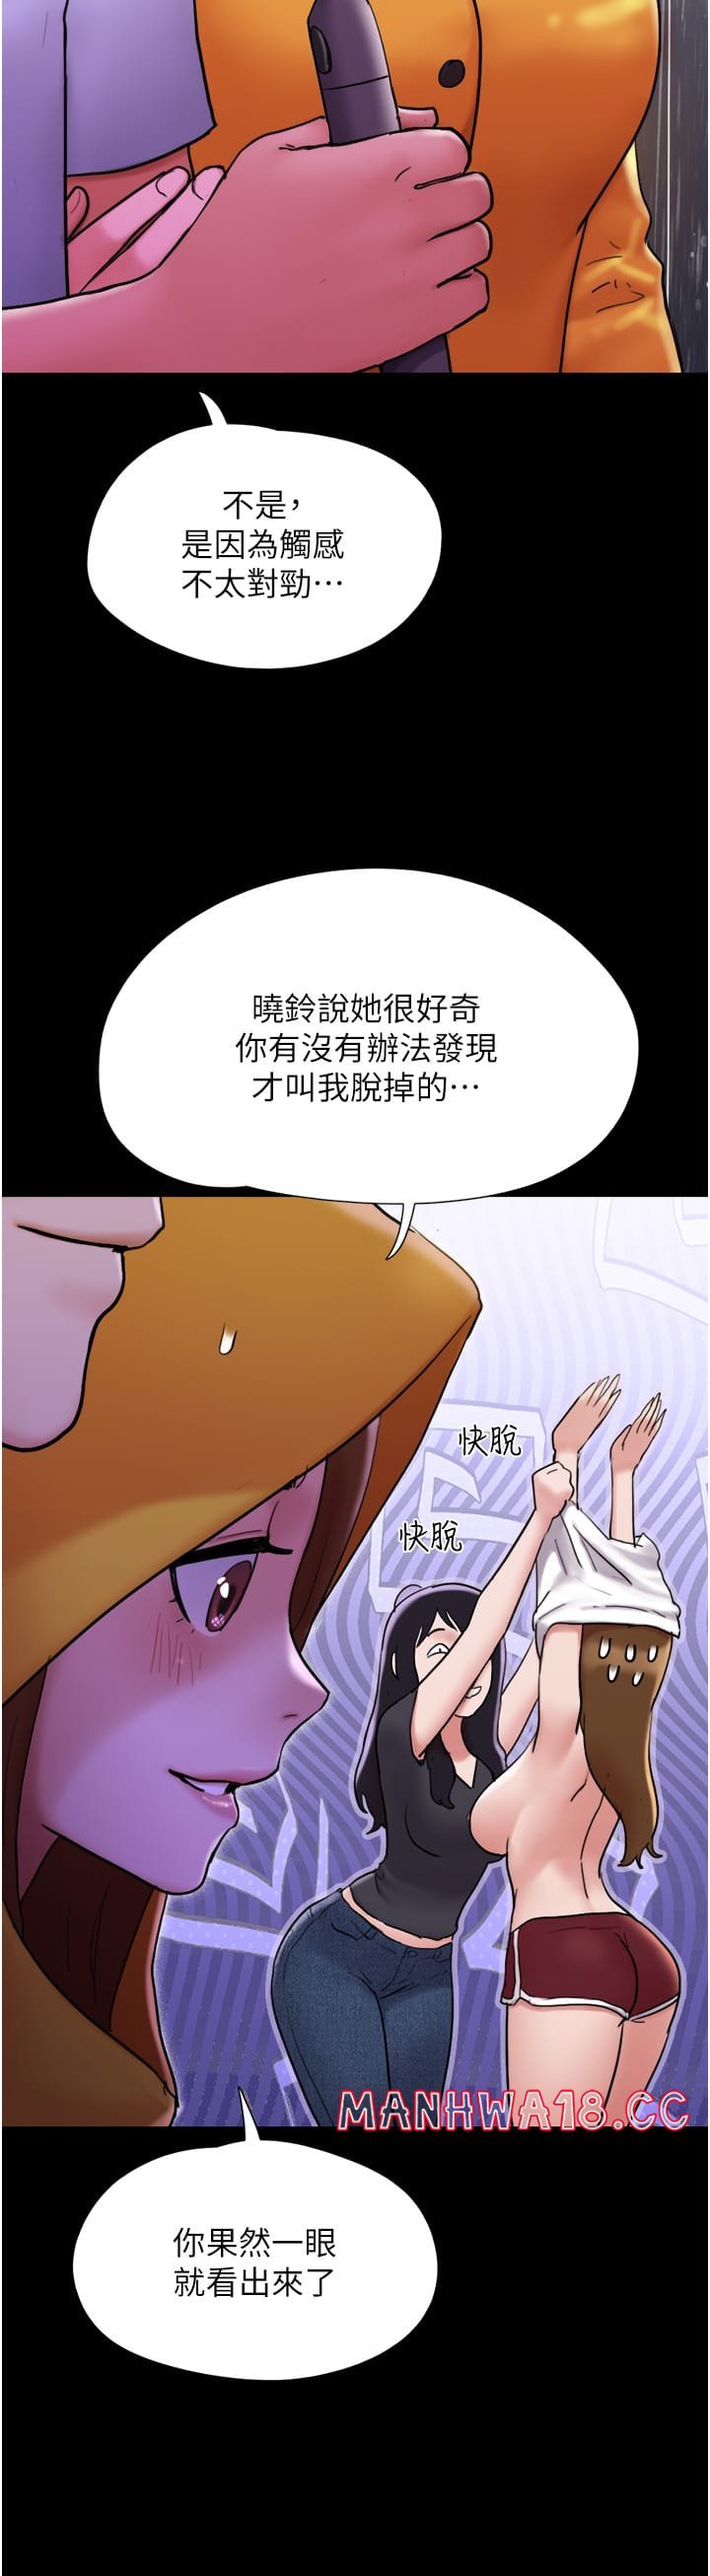 not-to-be-missed-raw-chap-30-48